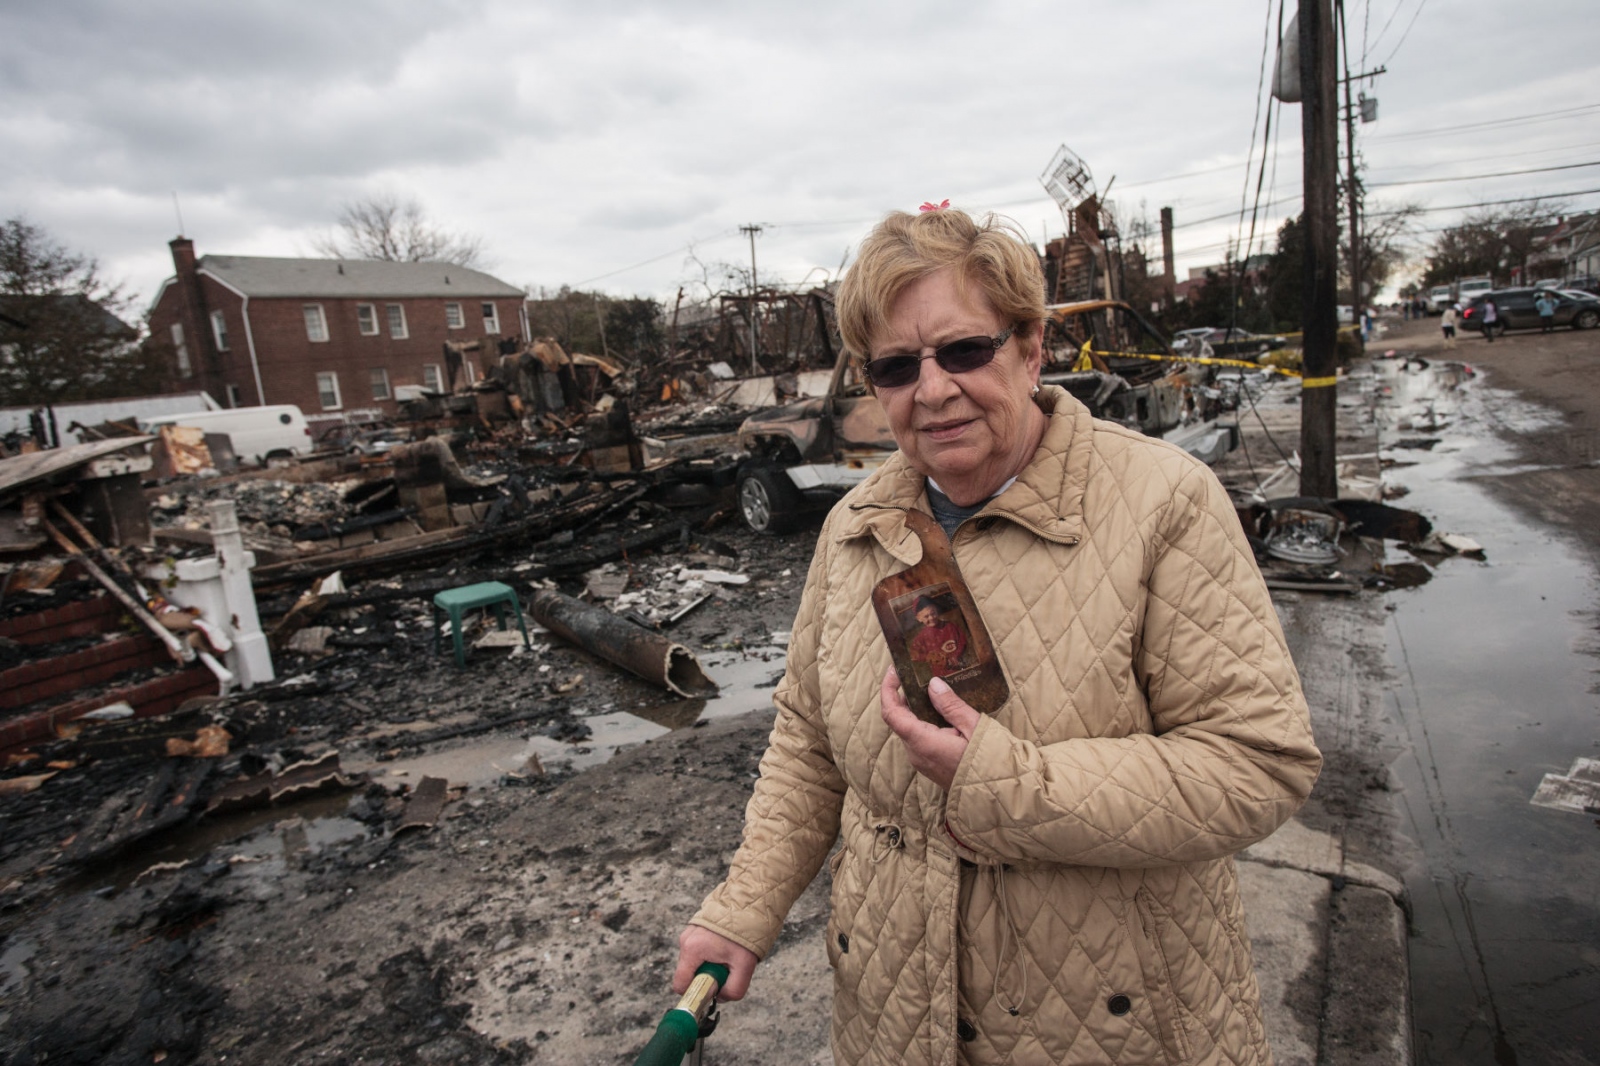 The Rockaways After Hurricane Sandy - Lorraine O'Neil, age 60, stands in front of her...